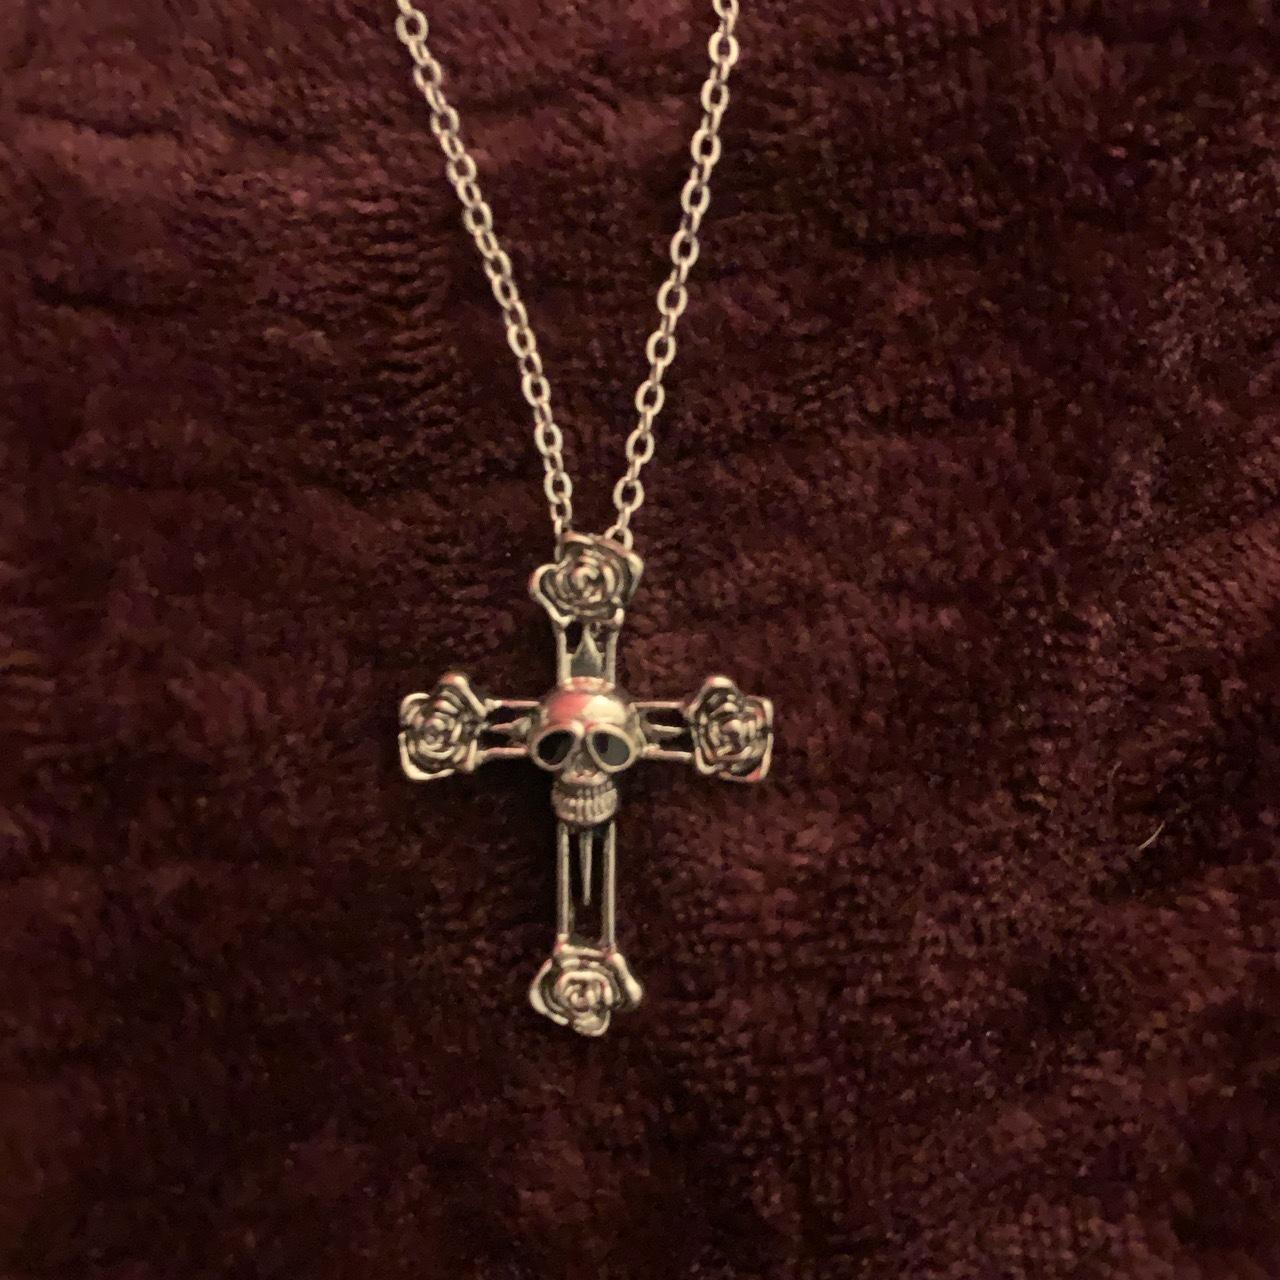 Large Gothic Cross Necklace silver-tone pendant on 24